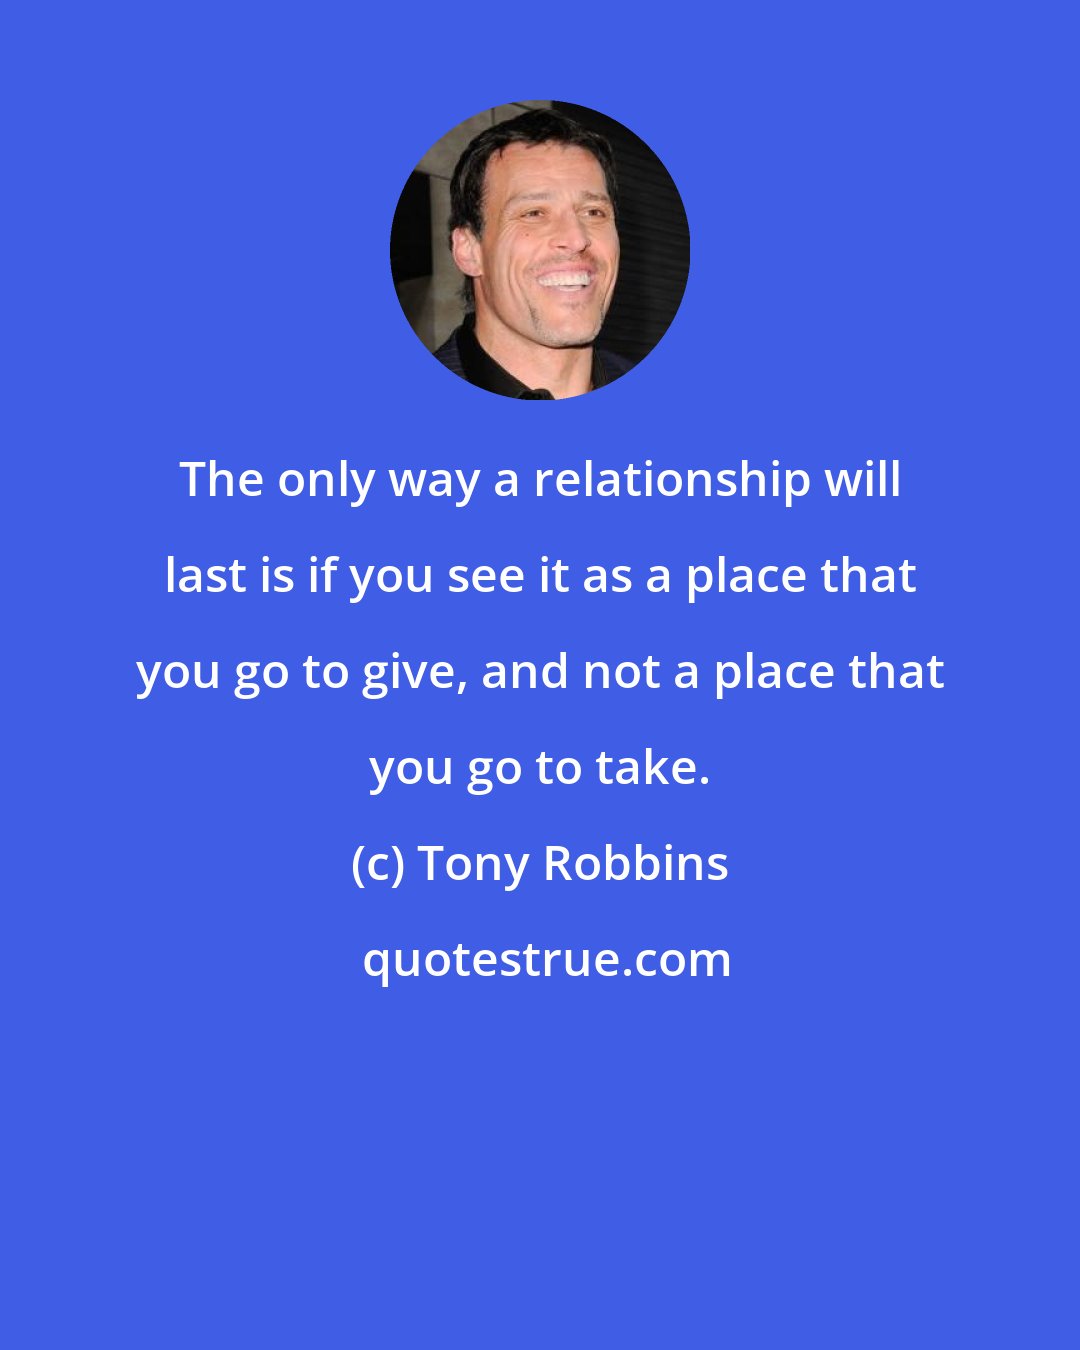 Tony Robbins: The only way a relationship will last is if you see it as a place that you go to give, and not a place that you go to take.